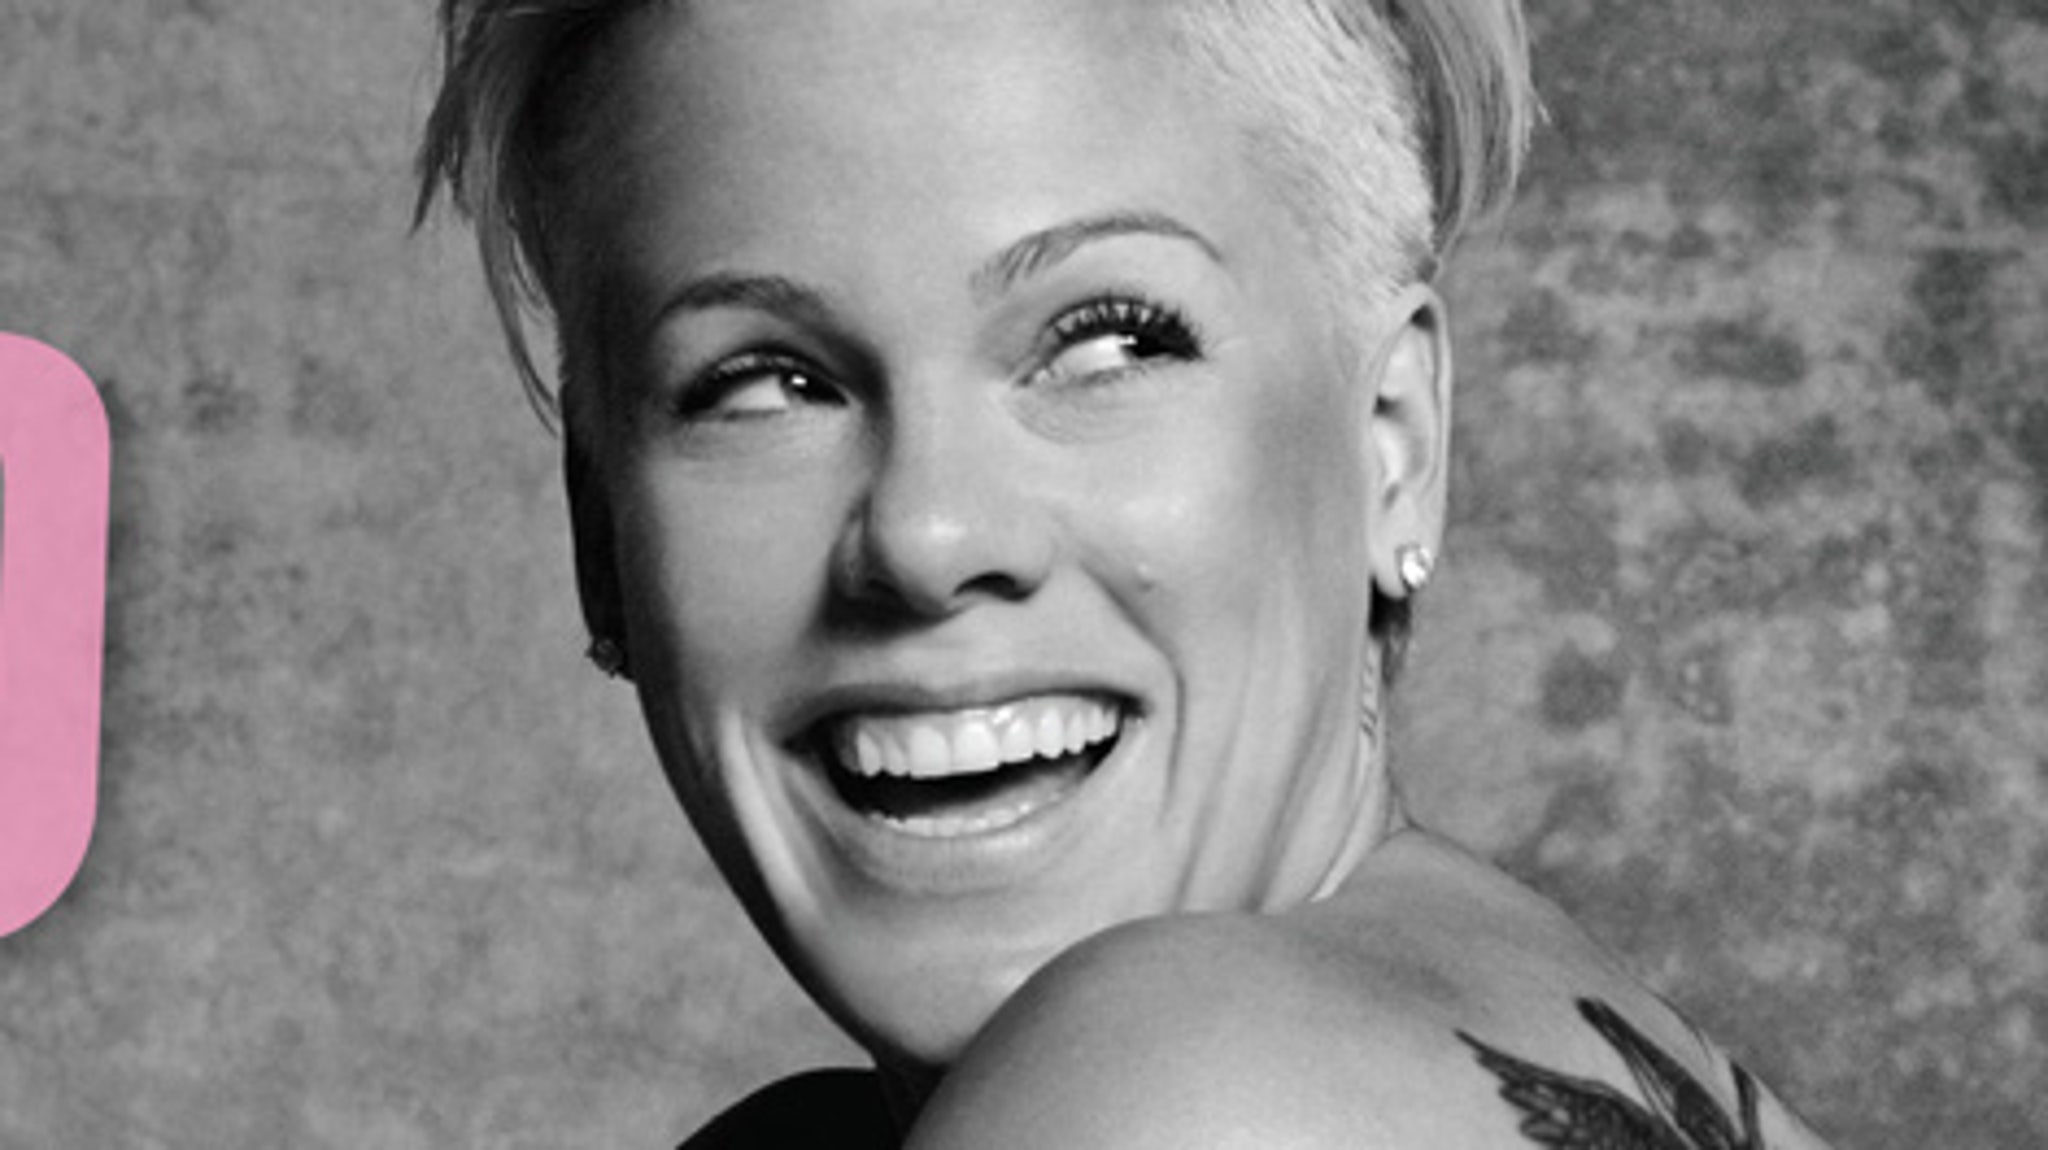 P!nk bares it all for PETA ad campaign